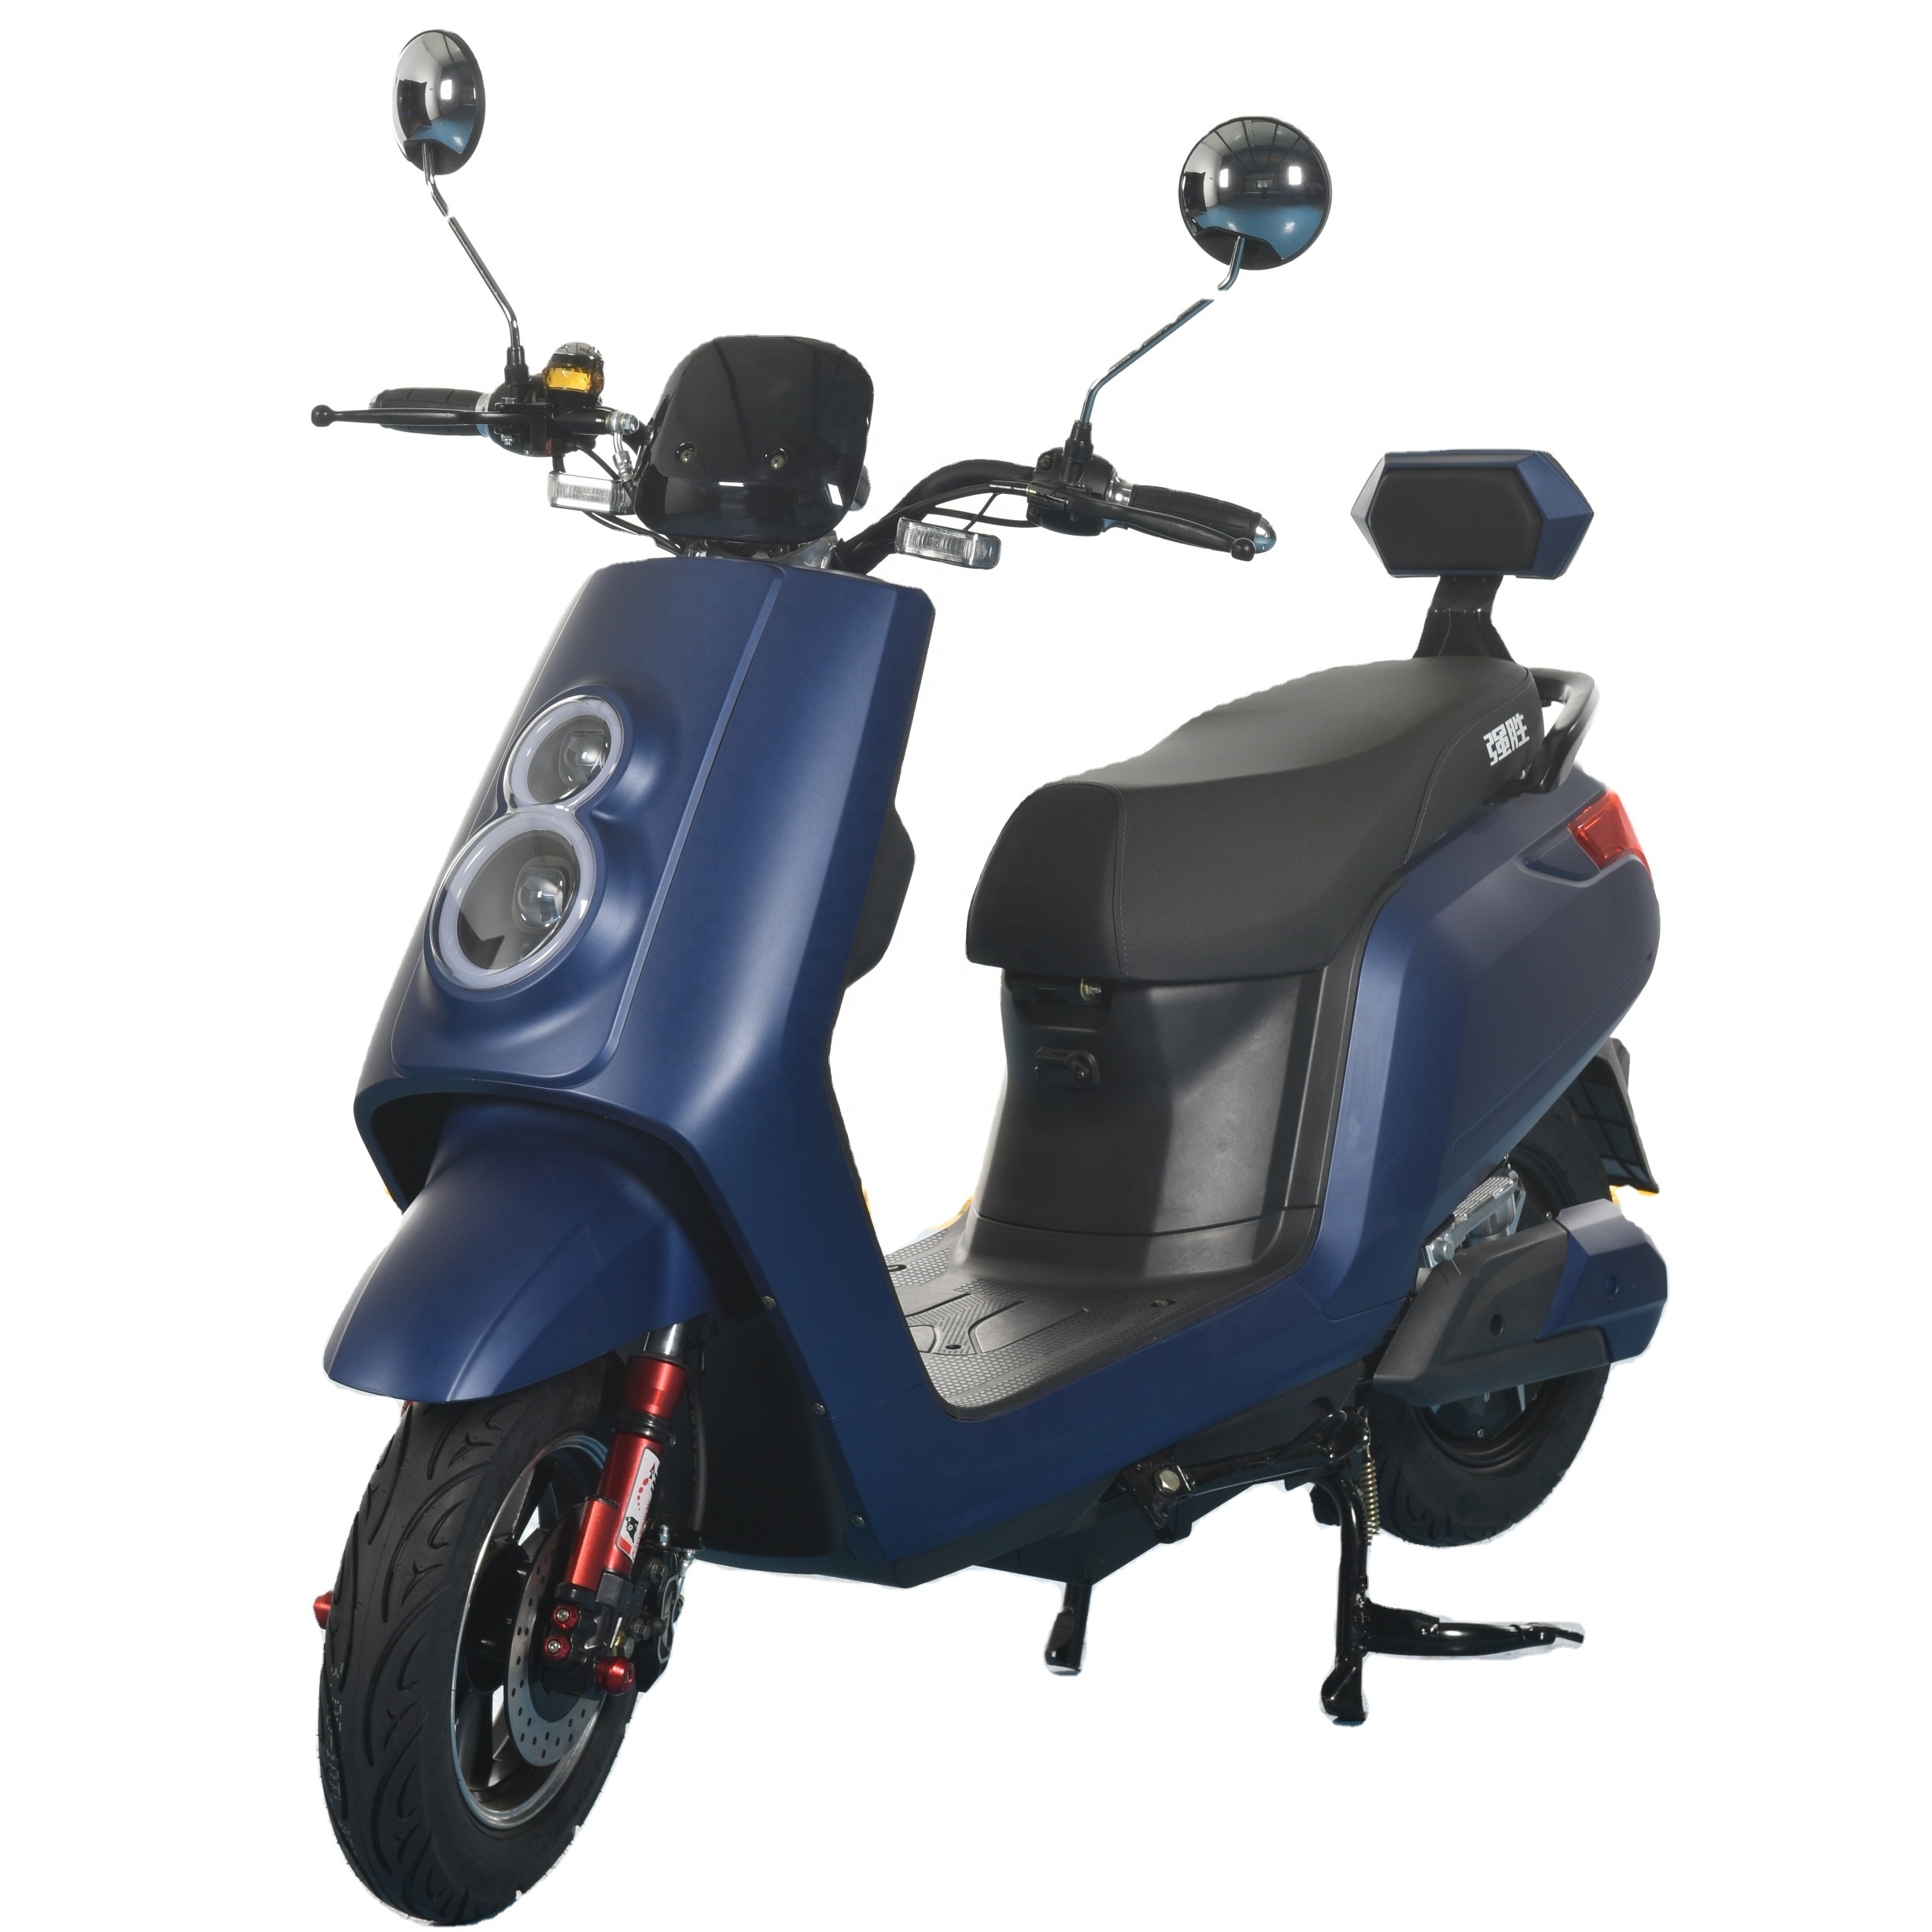 China Wholesale Trike Motorcycle Catalog/Pdf Manufacturers - 2020 New design cargo e bike for adult 800w electric scooter China Factory Supply – Qiangsheng